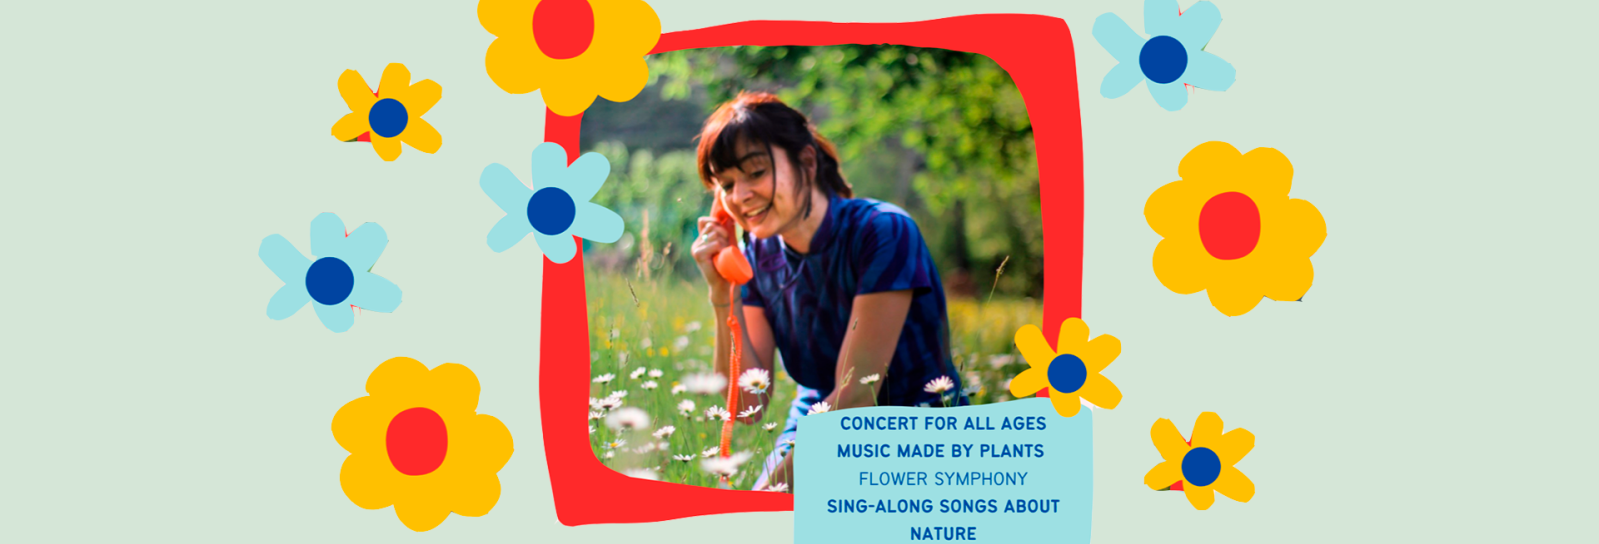 Concert for alle ages. Music made by plants. Flower symphony. Sing-along song about nature. 